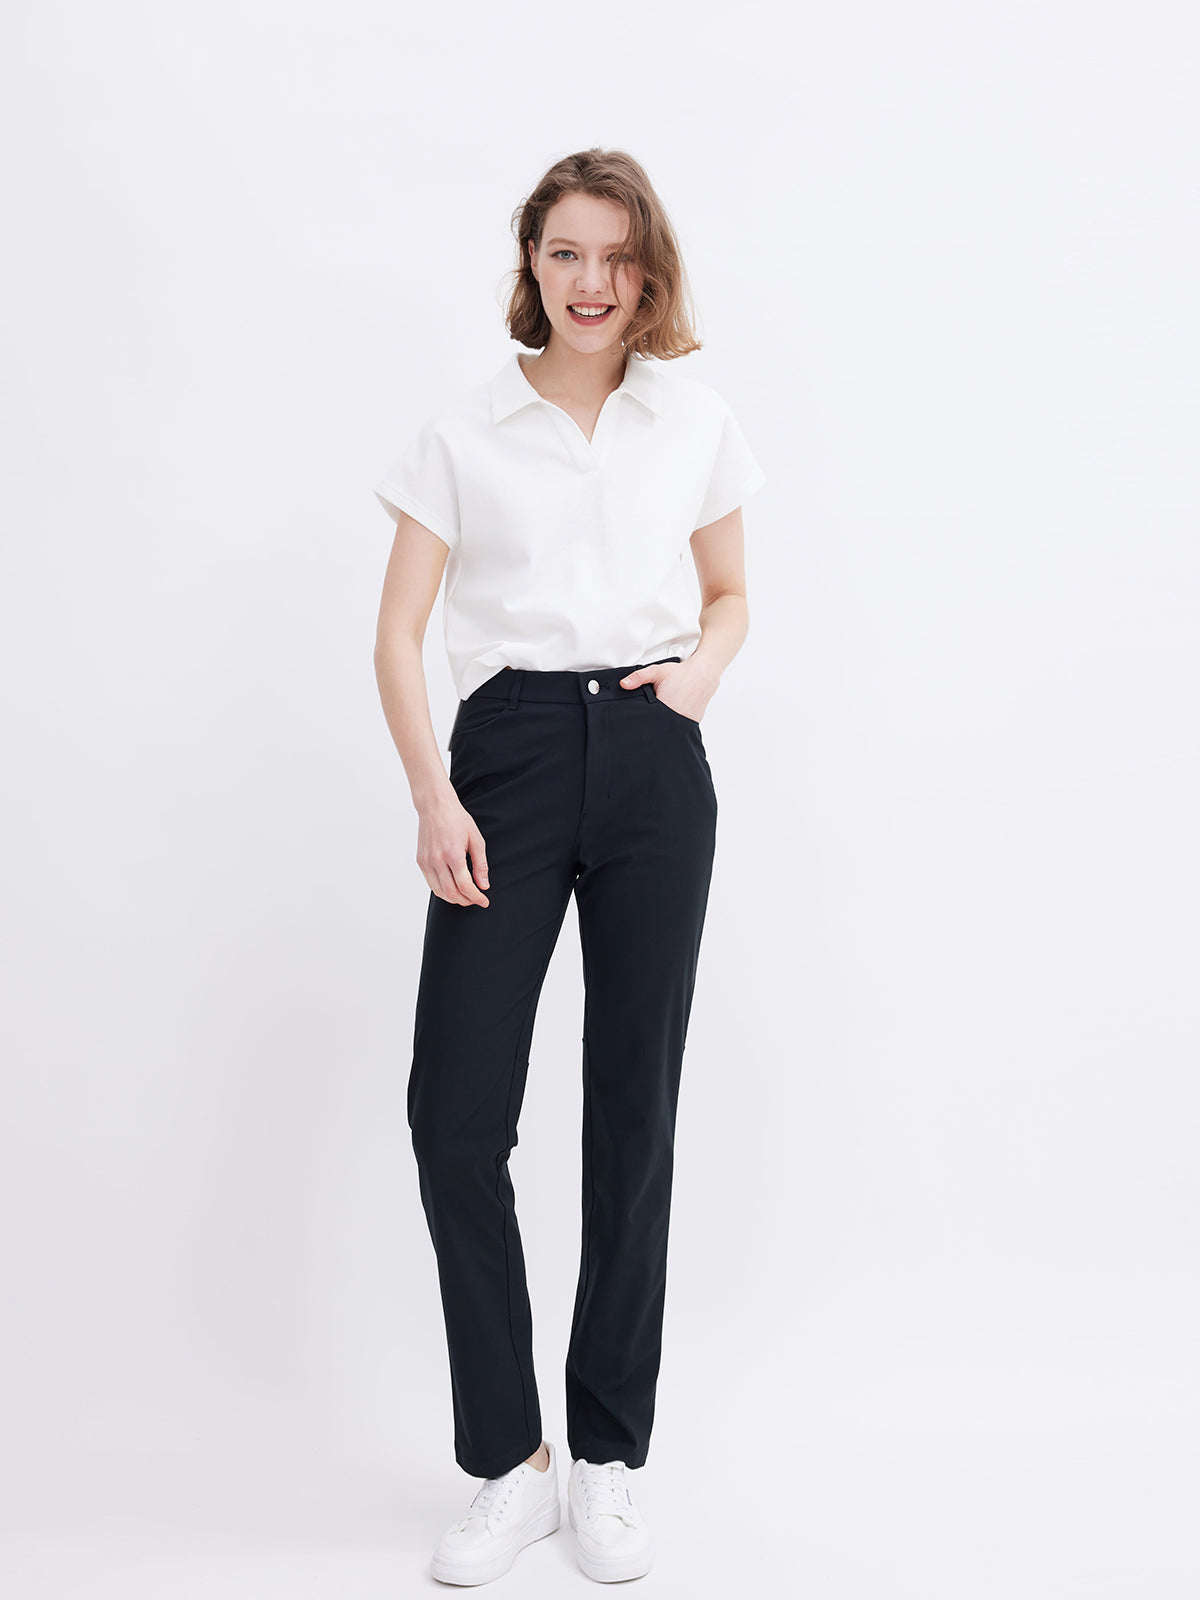 Relaxed Fit Wrinkle Free Straight-Leg Pants